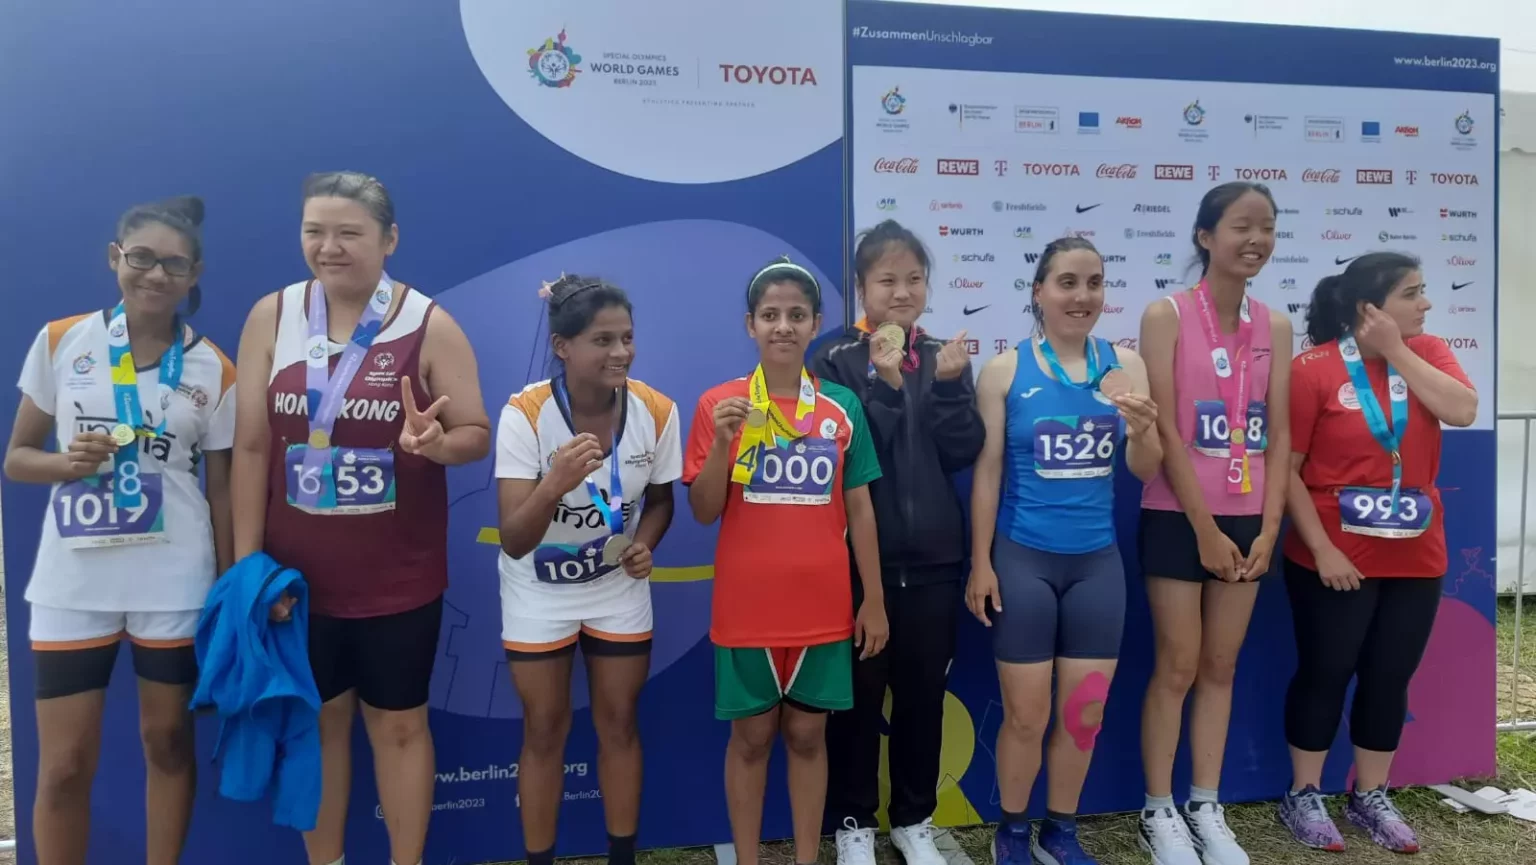 India concluded Special Olympics with 202 medals - Asiana Times